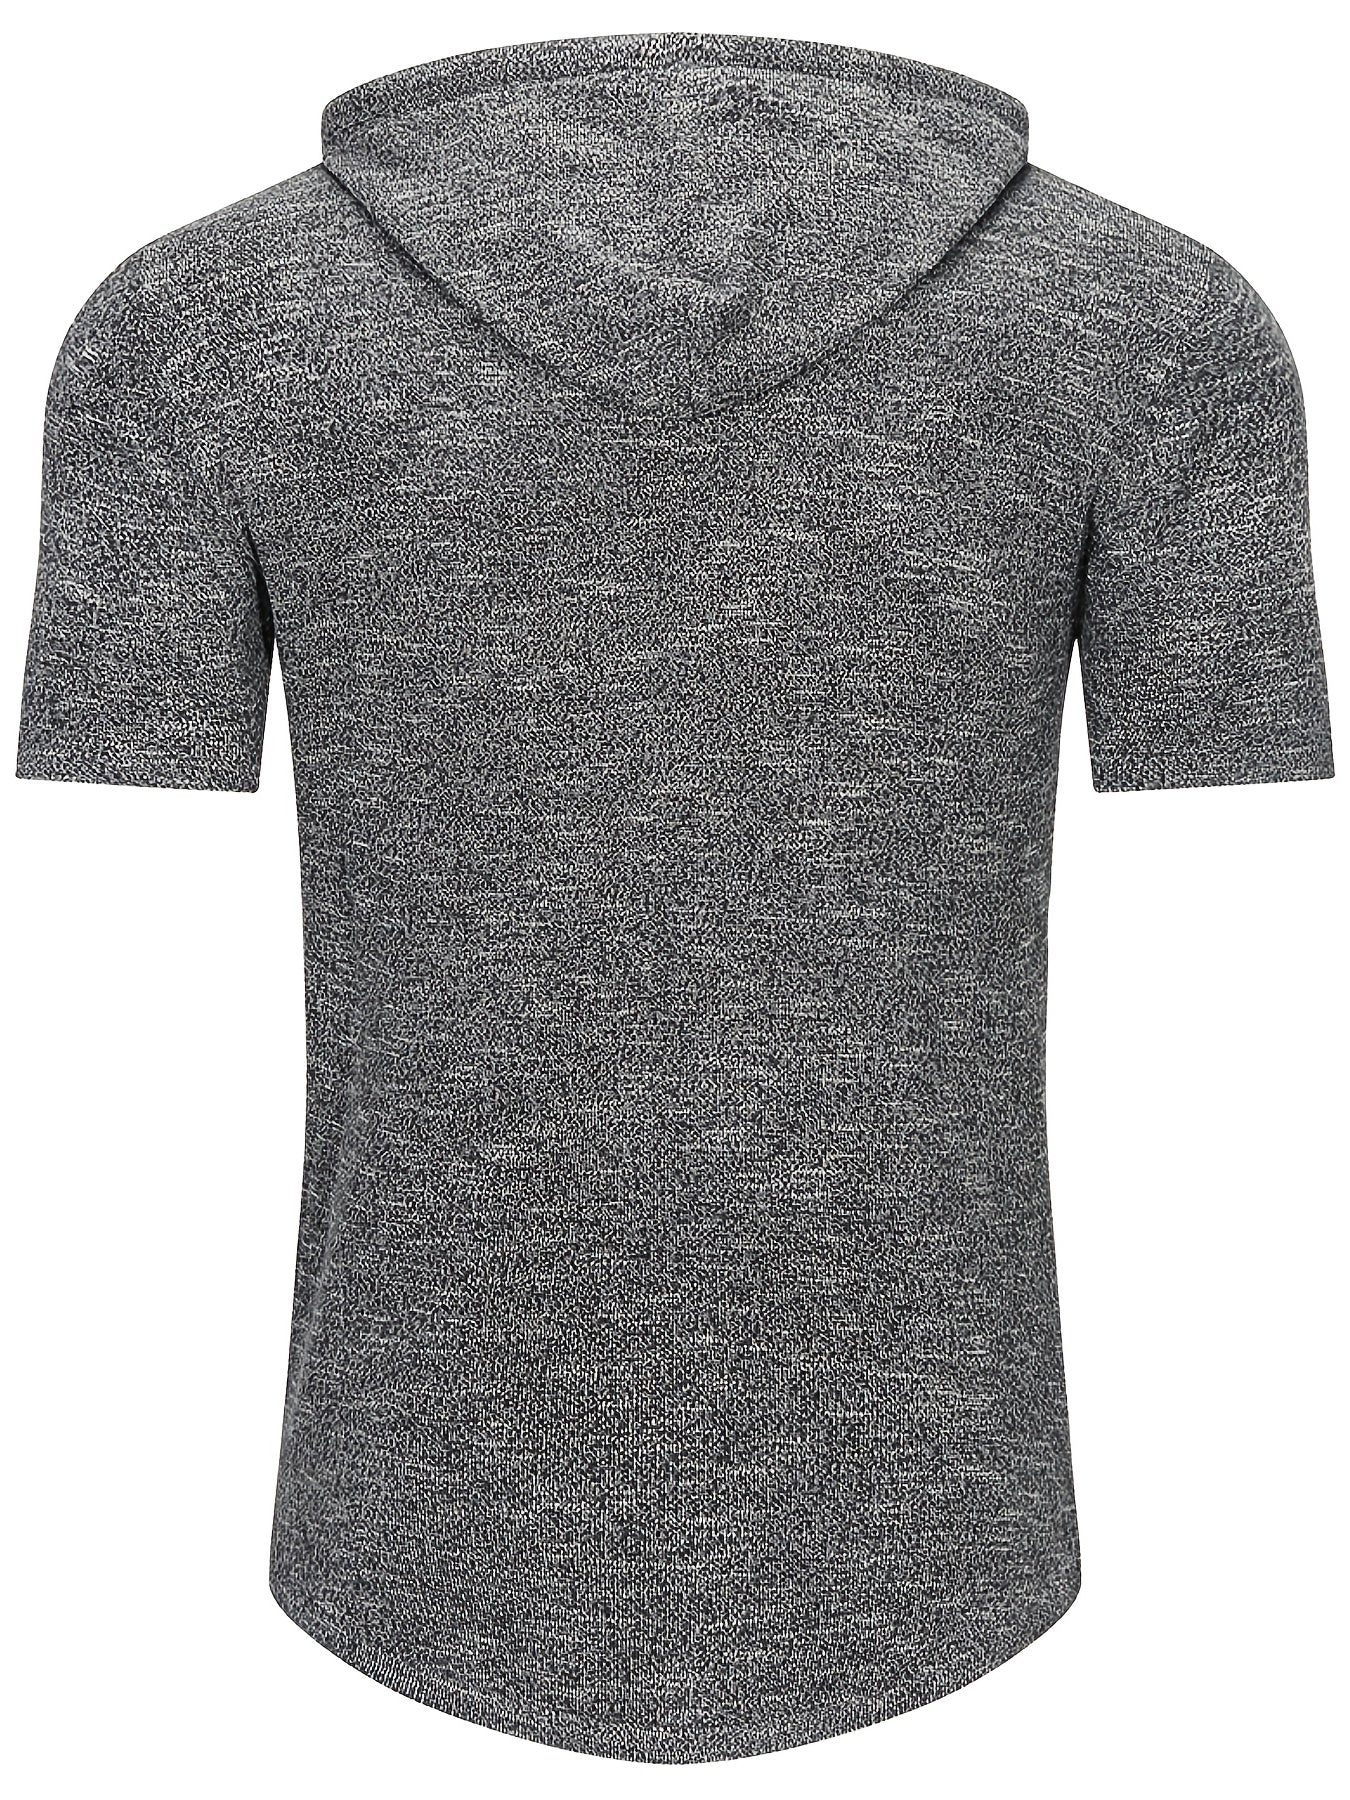 Men's Knit Top Casual Short Sleeve Breathable Hooded T-Shirts